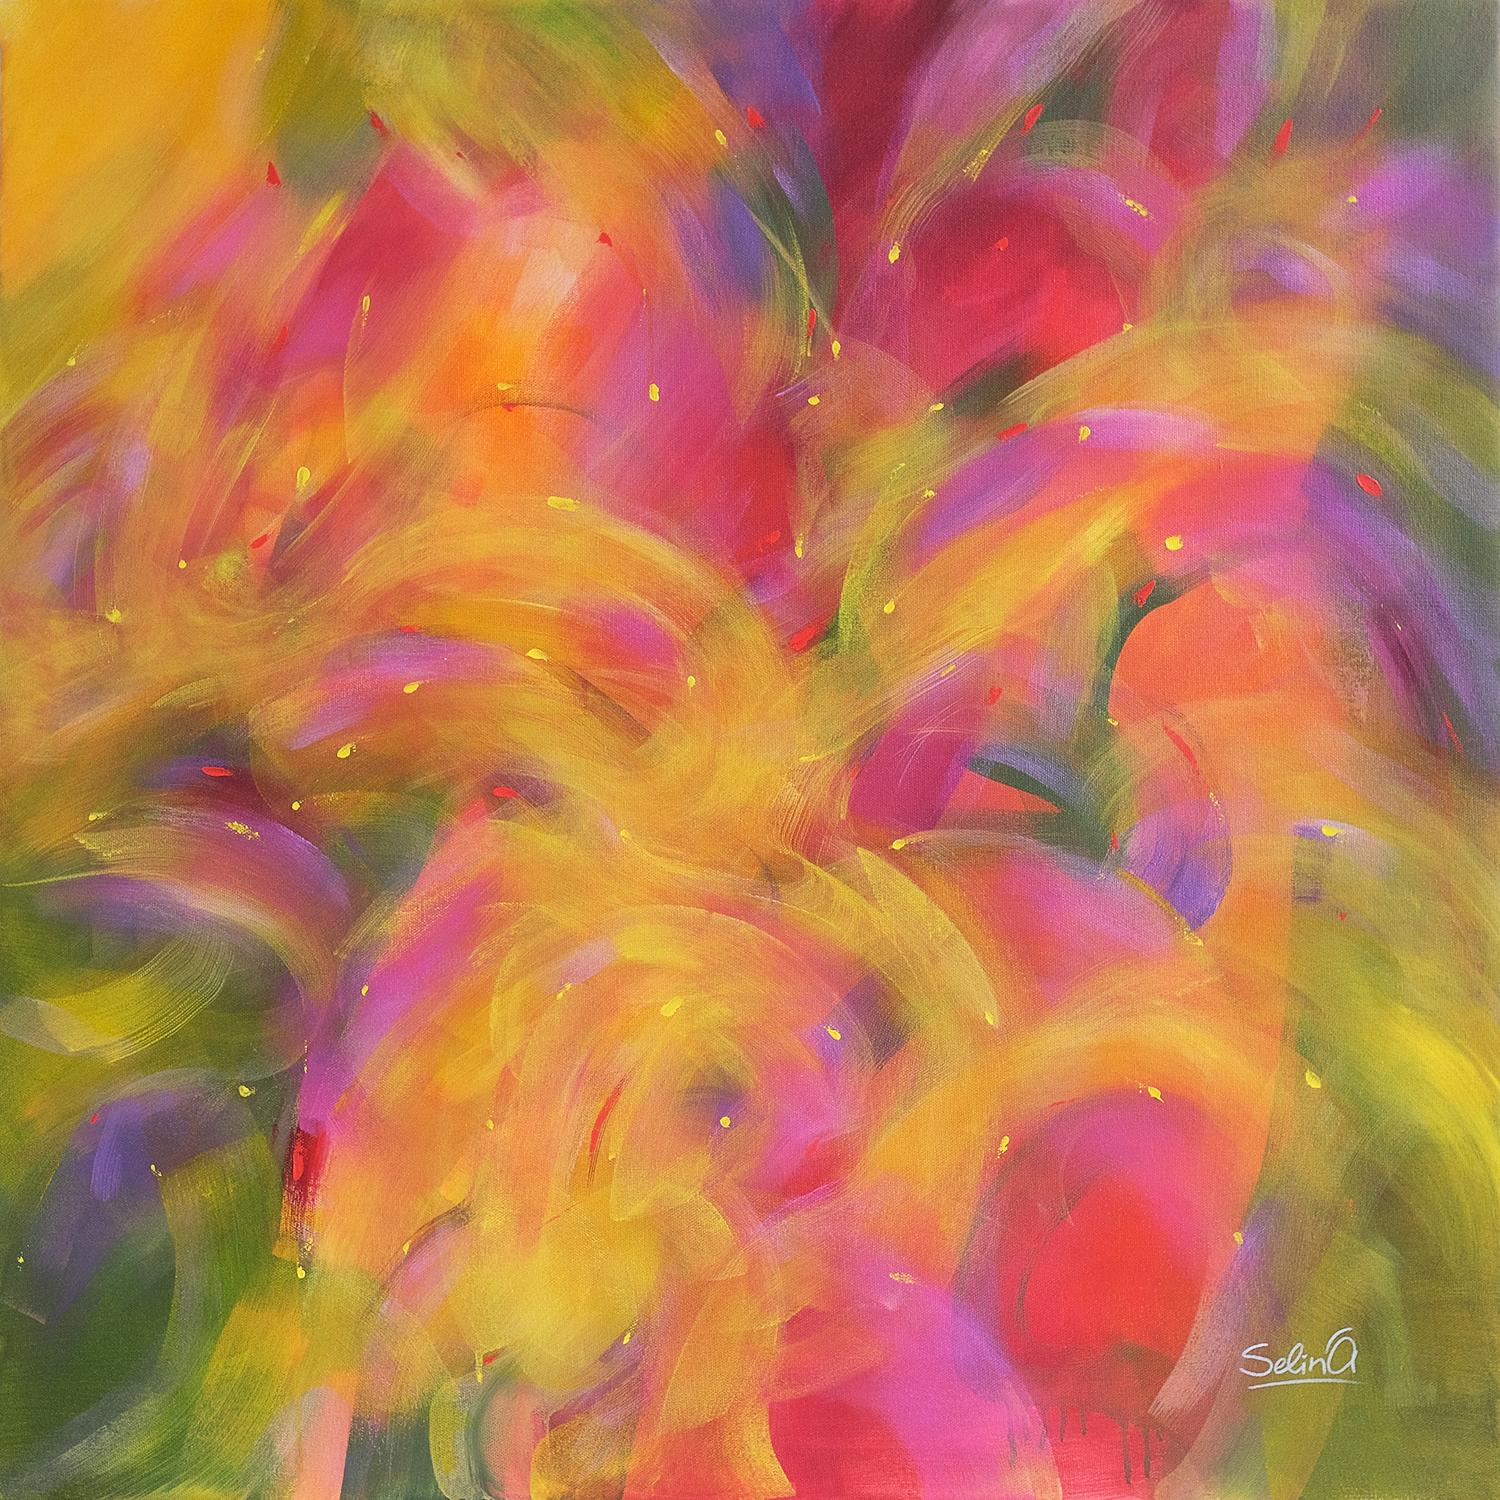 Warm light is one of the painting from my new series "The Light" about  light of inner world, of our deepness,spiritual searches and light of our individuality. Like in nature,warm light  is soft and gentle, but giving us a sense of our body,